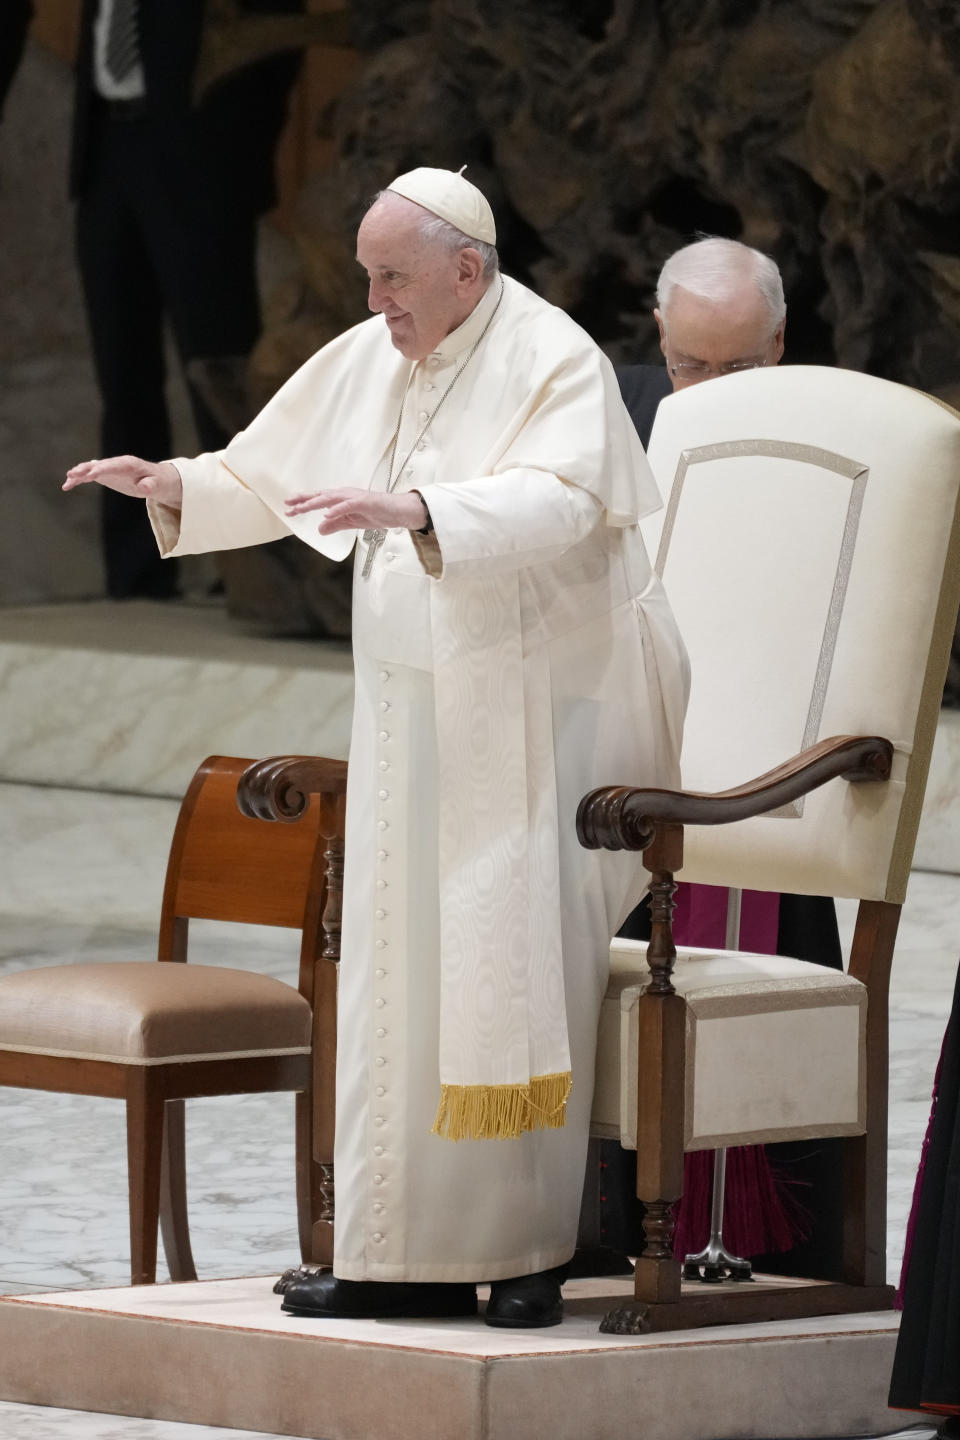 Pope Francis arrives for an audience with Vatican's employees in the Paul VI Hall, at the Vatican, Thursday, Dec. 22, 2022. (AP Photo/Andrew Medichini)